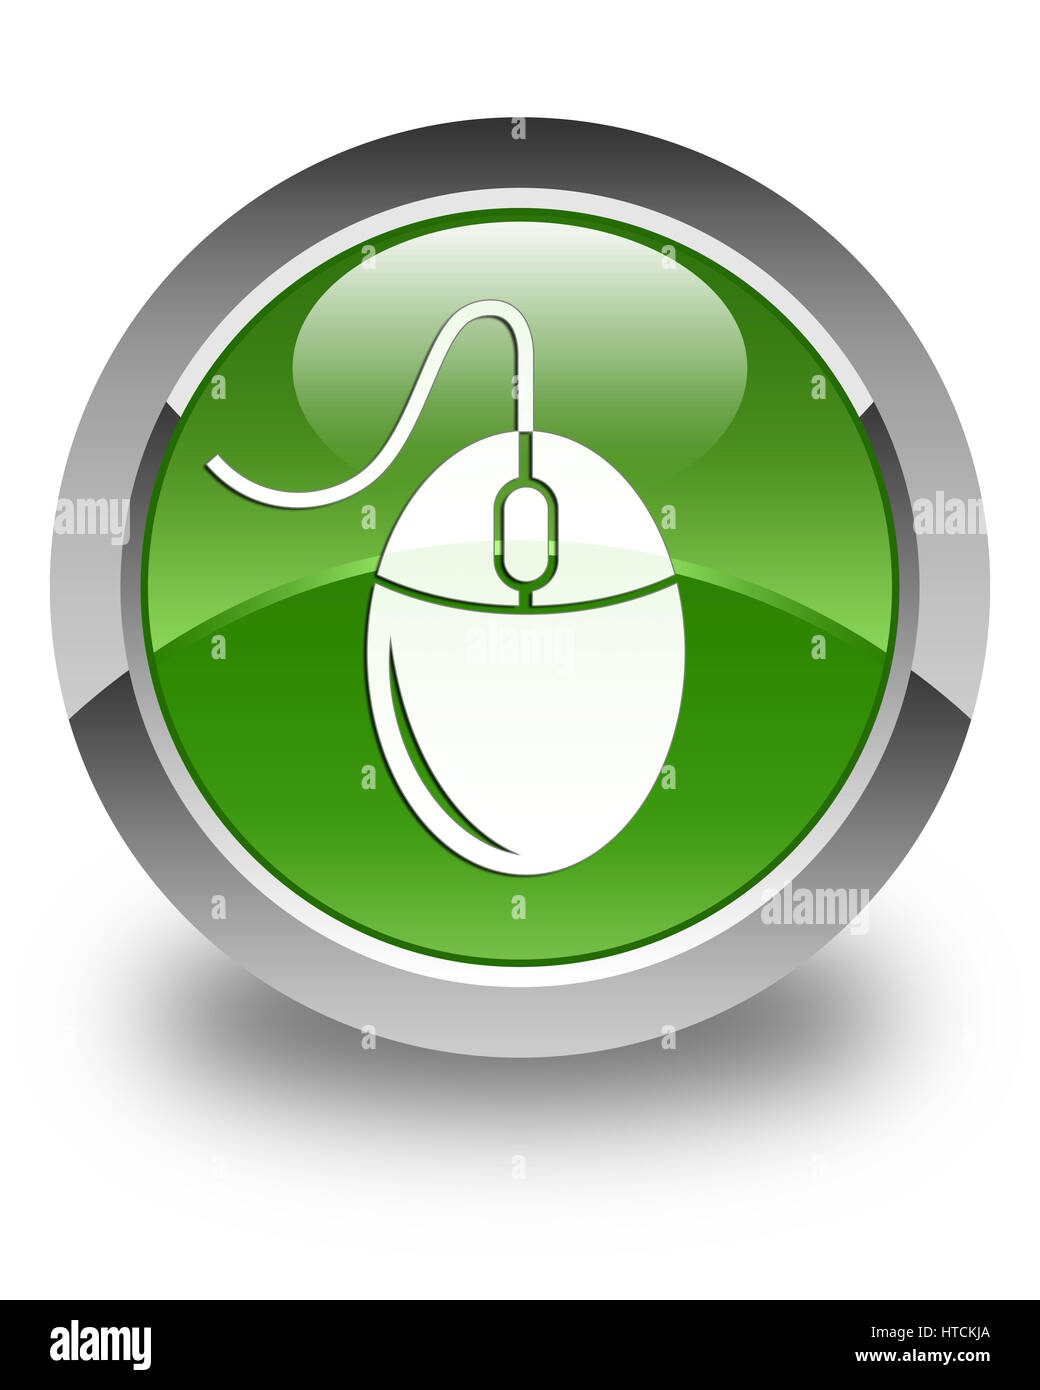 Mouse icon isolated on glossy soft green round button abstract illustration Stock Photo